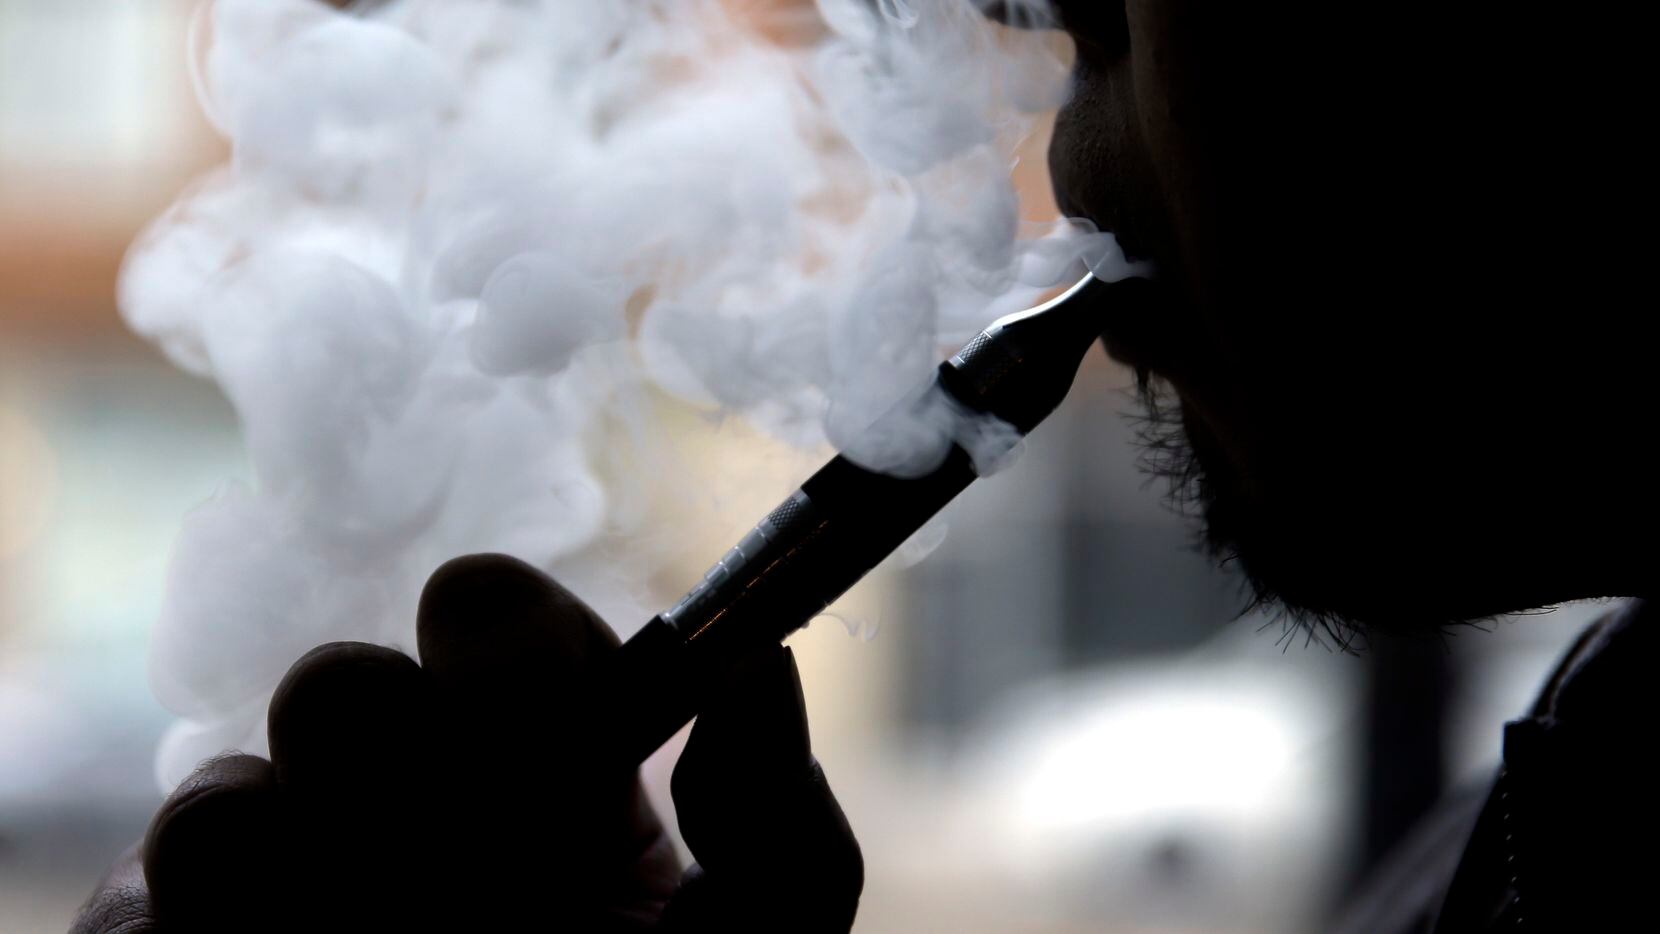 
A vaper puffs away on a battery-operated nicotine stick. Electronic cigarettes can save...